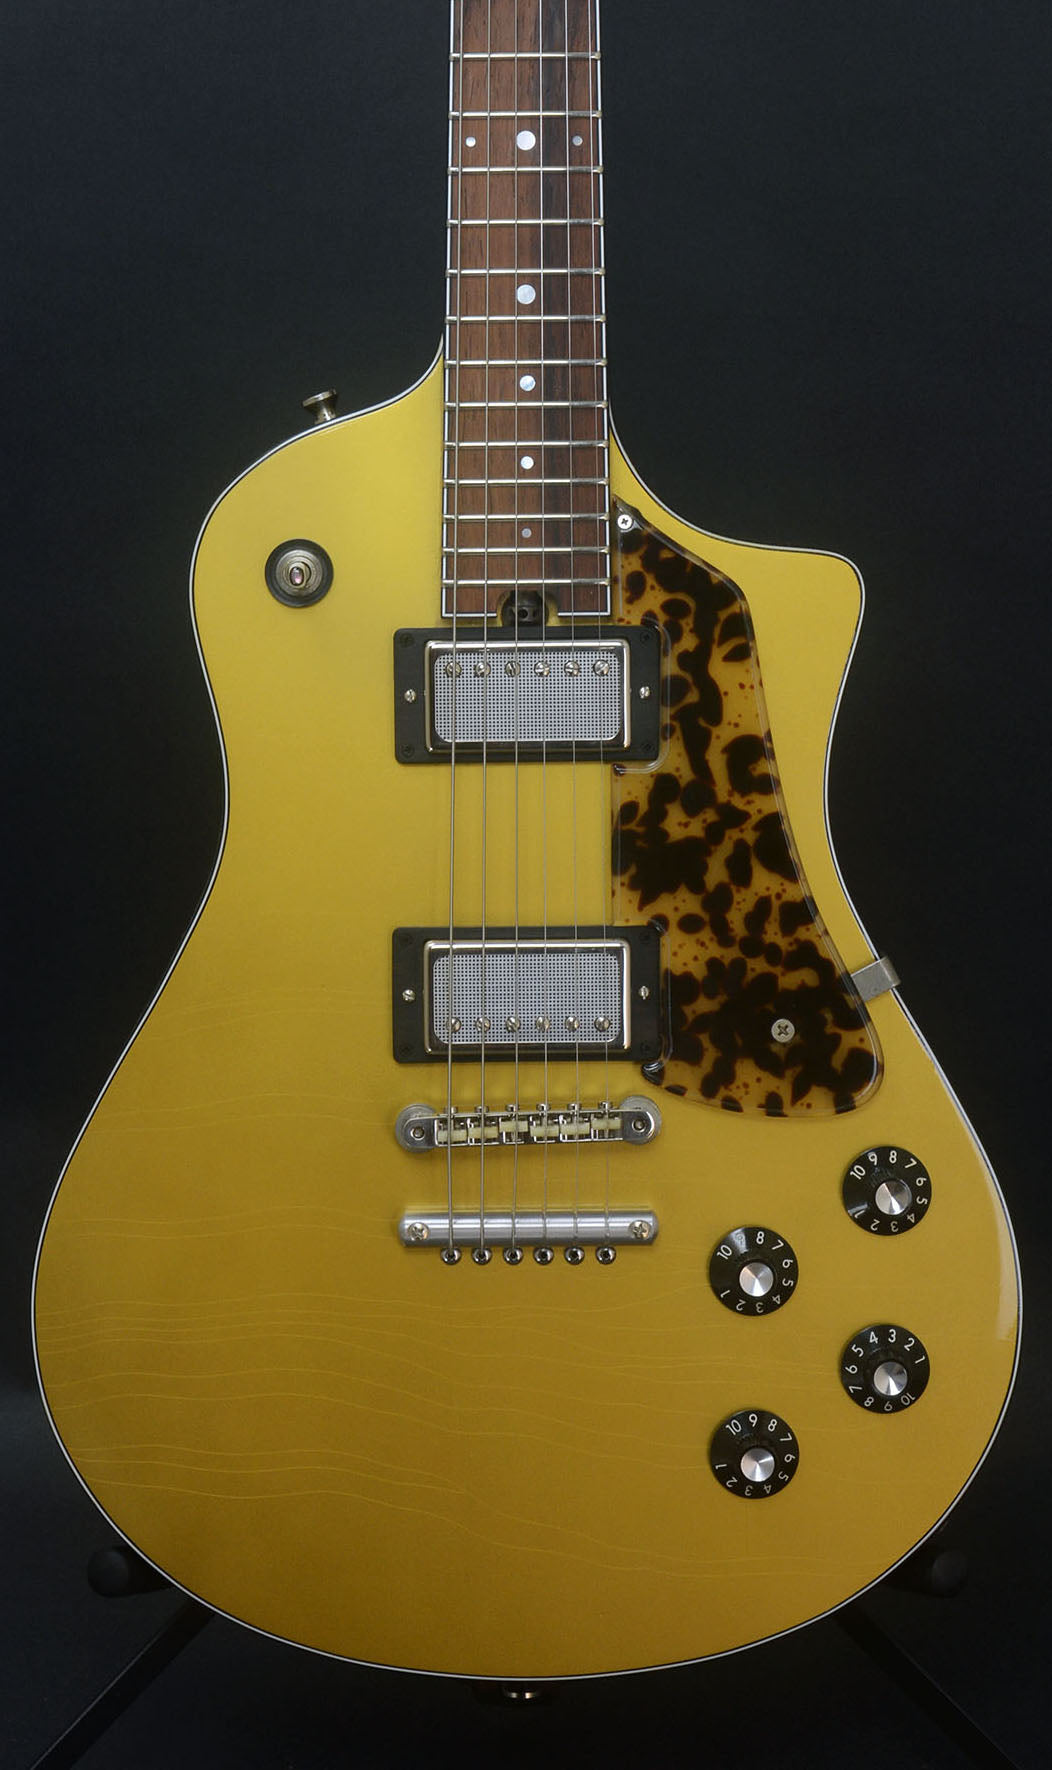 SOLD Electro Sonic Gold Top #1026, Blues Bucker Pickup Set with Custom Face Plates, Custom Details